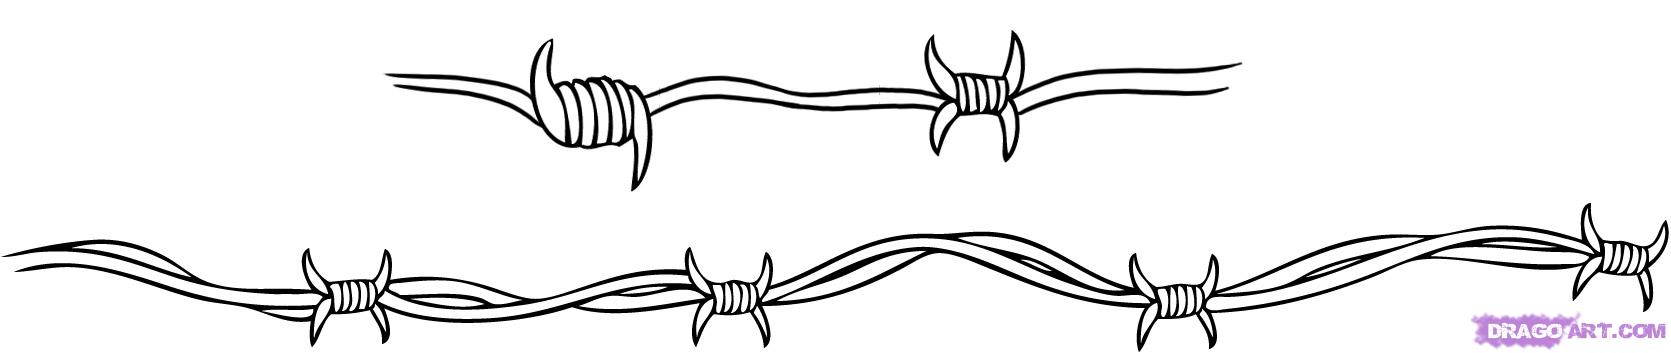 How To Draw Barbed Wire In Illustrator